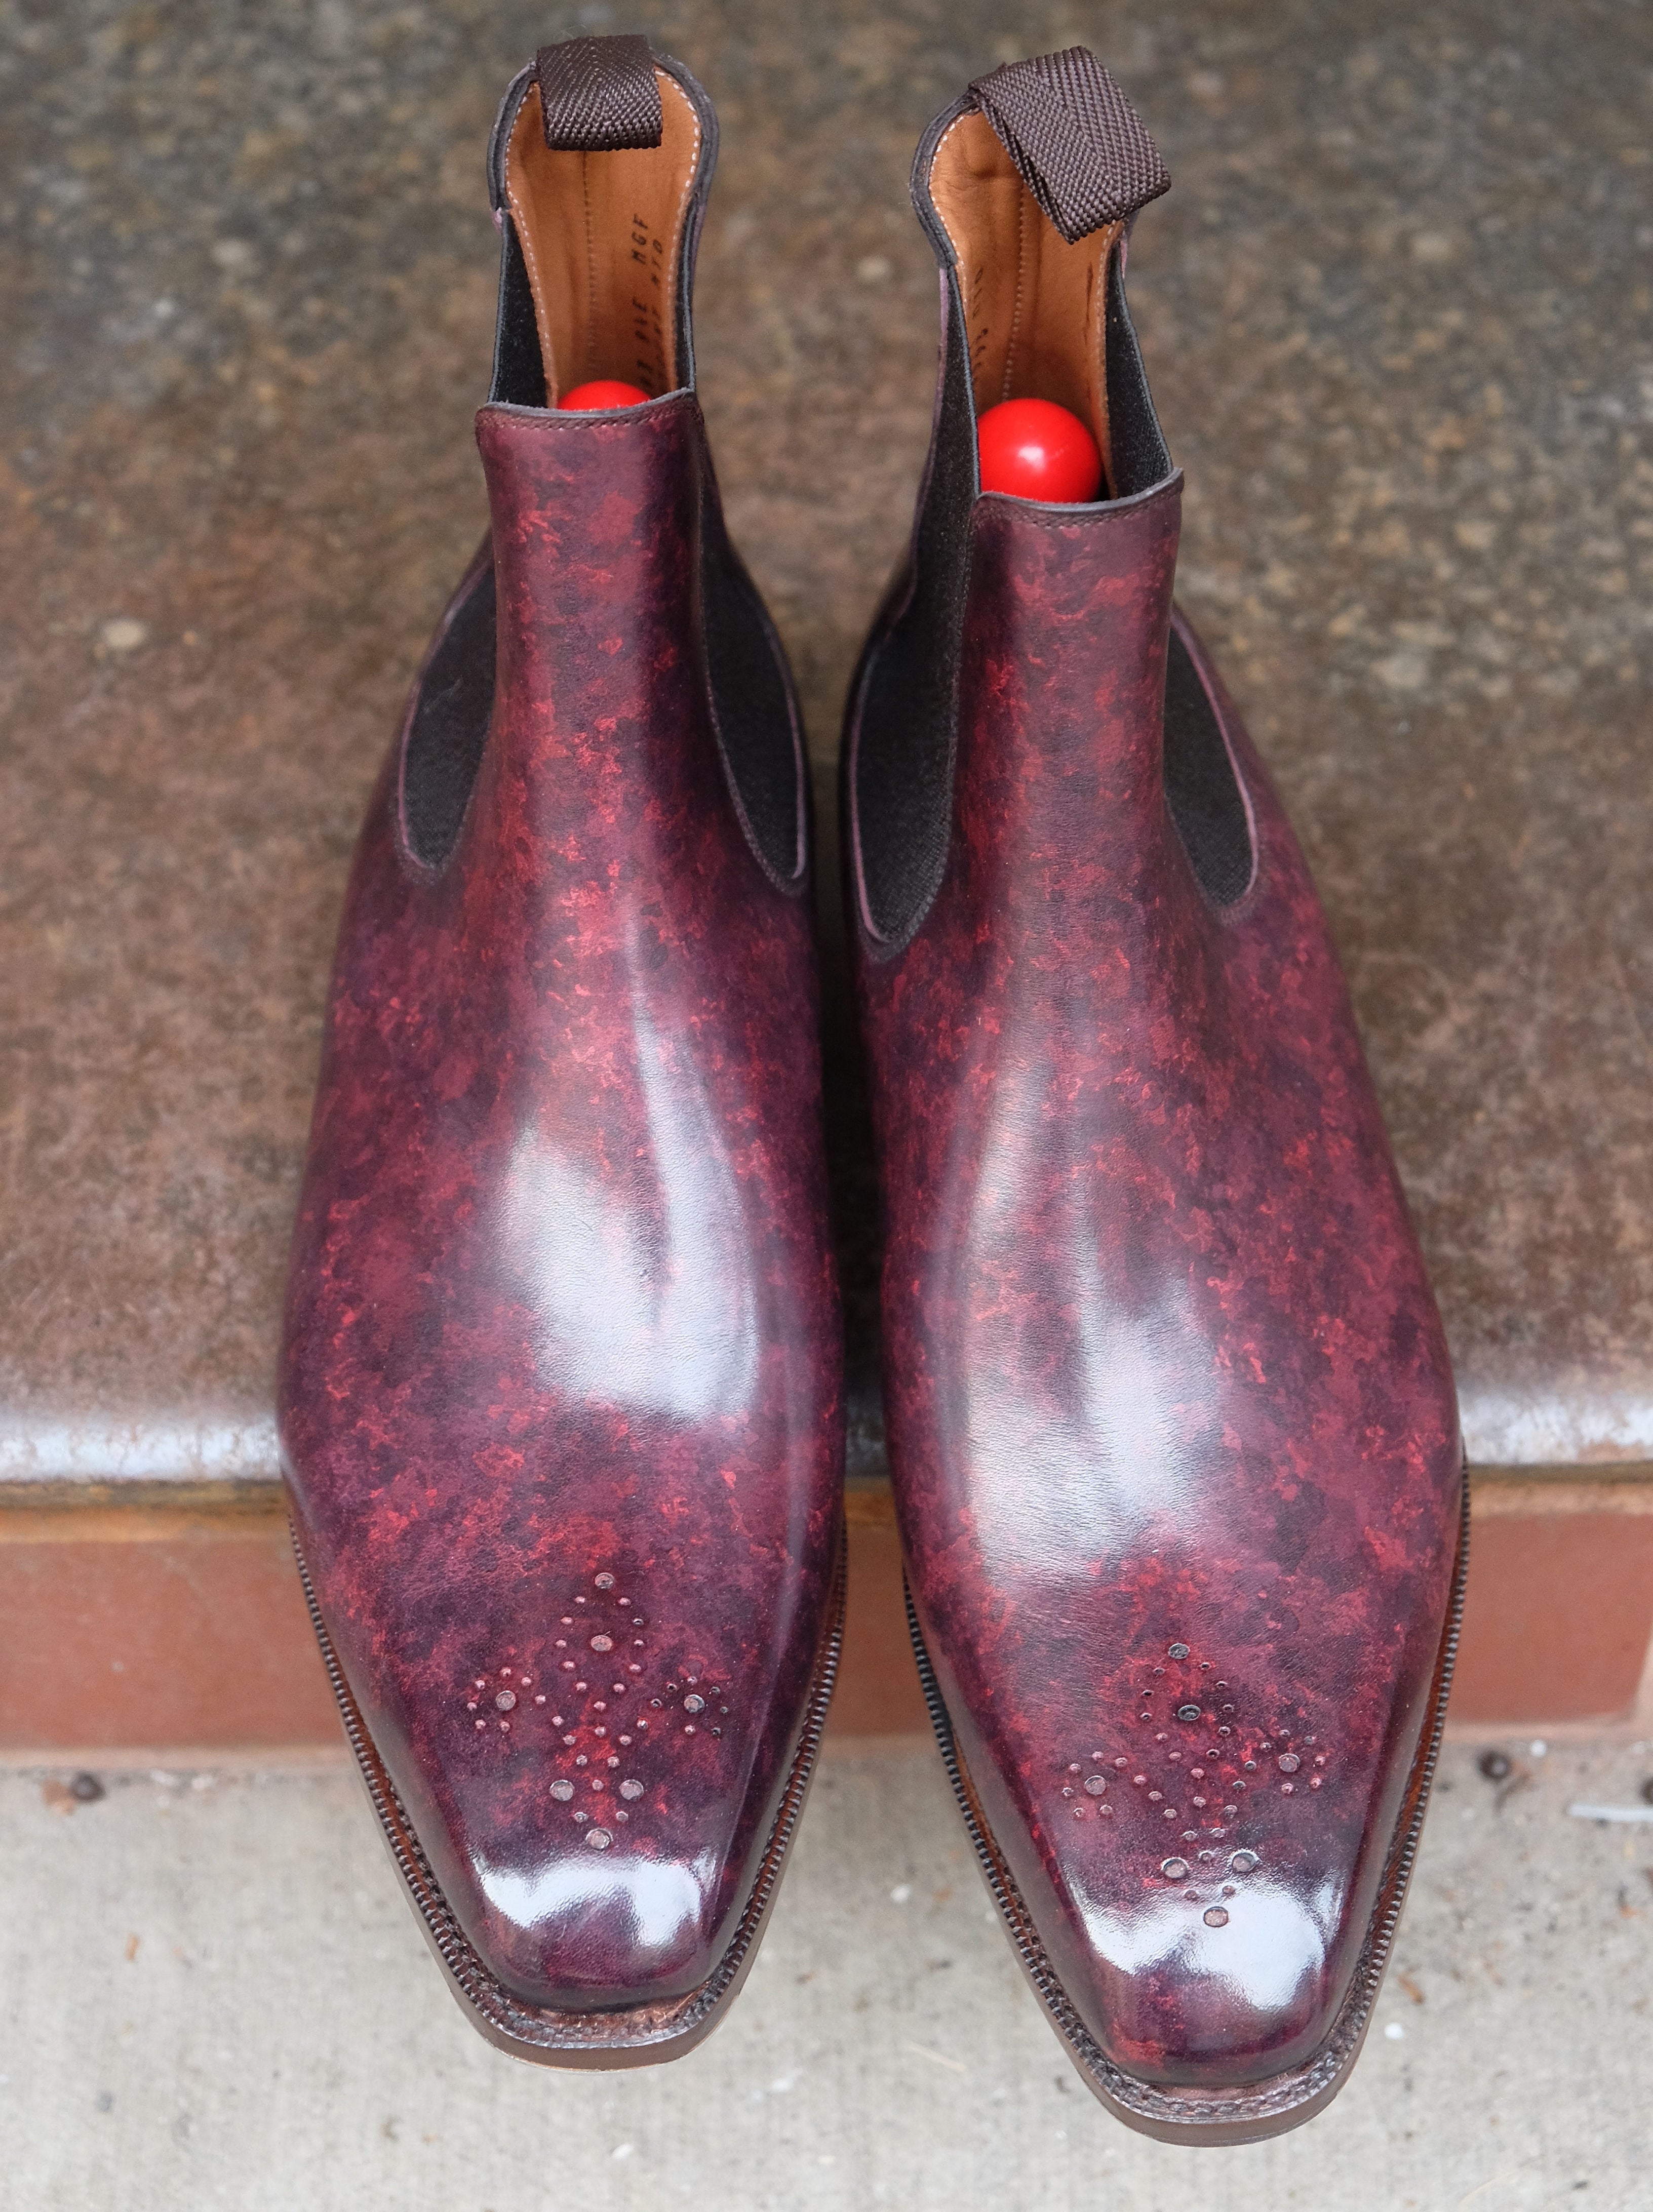 Fairmont - MTO - Mulberry Marble Patina Calf - MGF Last - Single City Rubber Sole